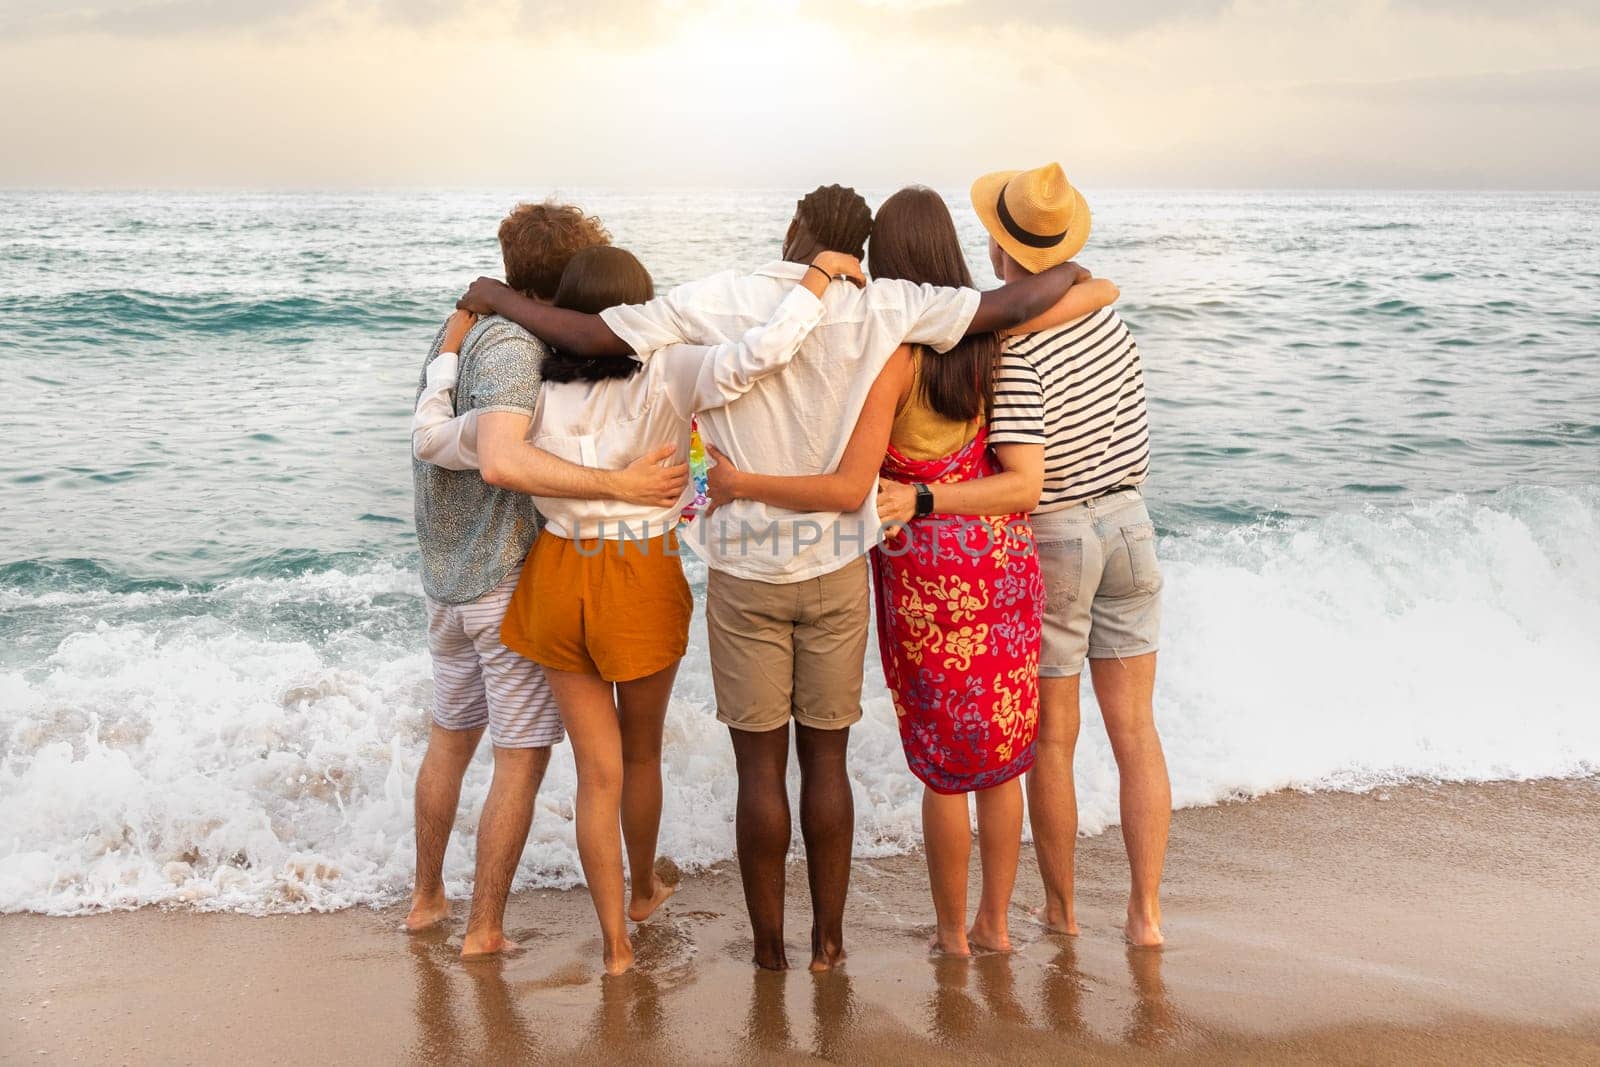 Rear view of multiracial friends embracing together looking at the ocean relaxing during vacation trip. Friendship concept.